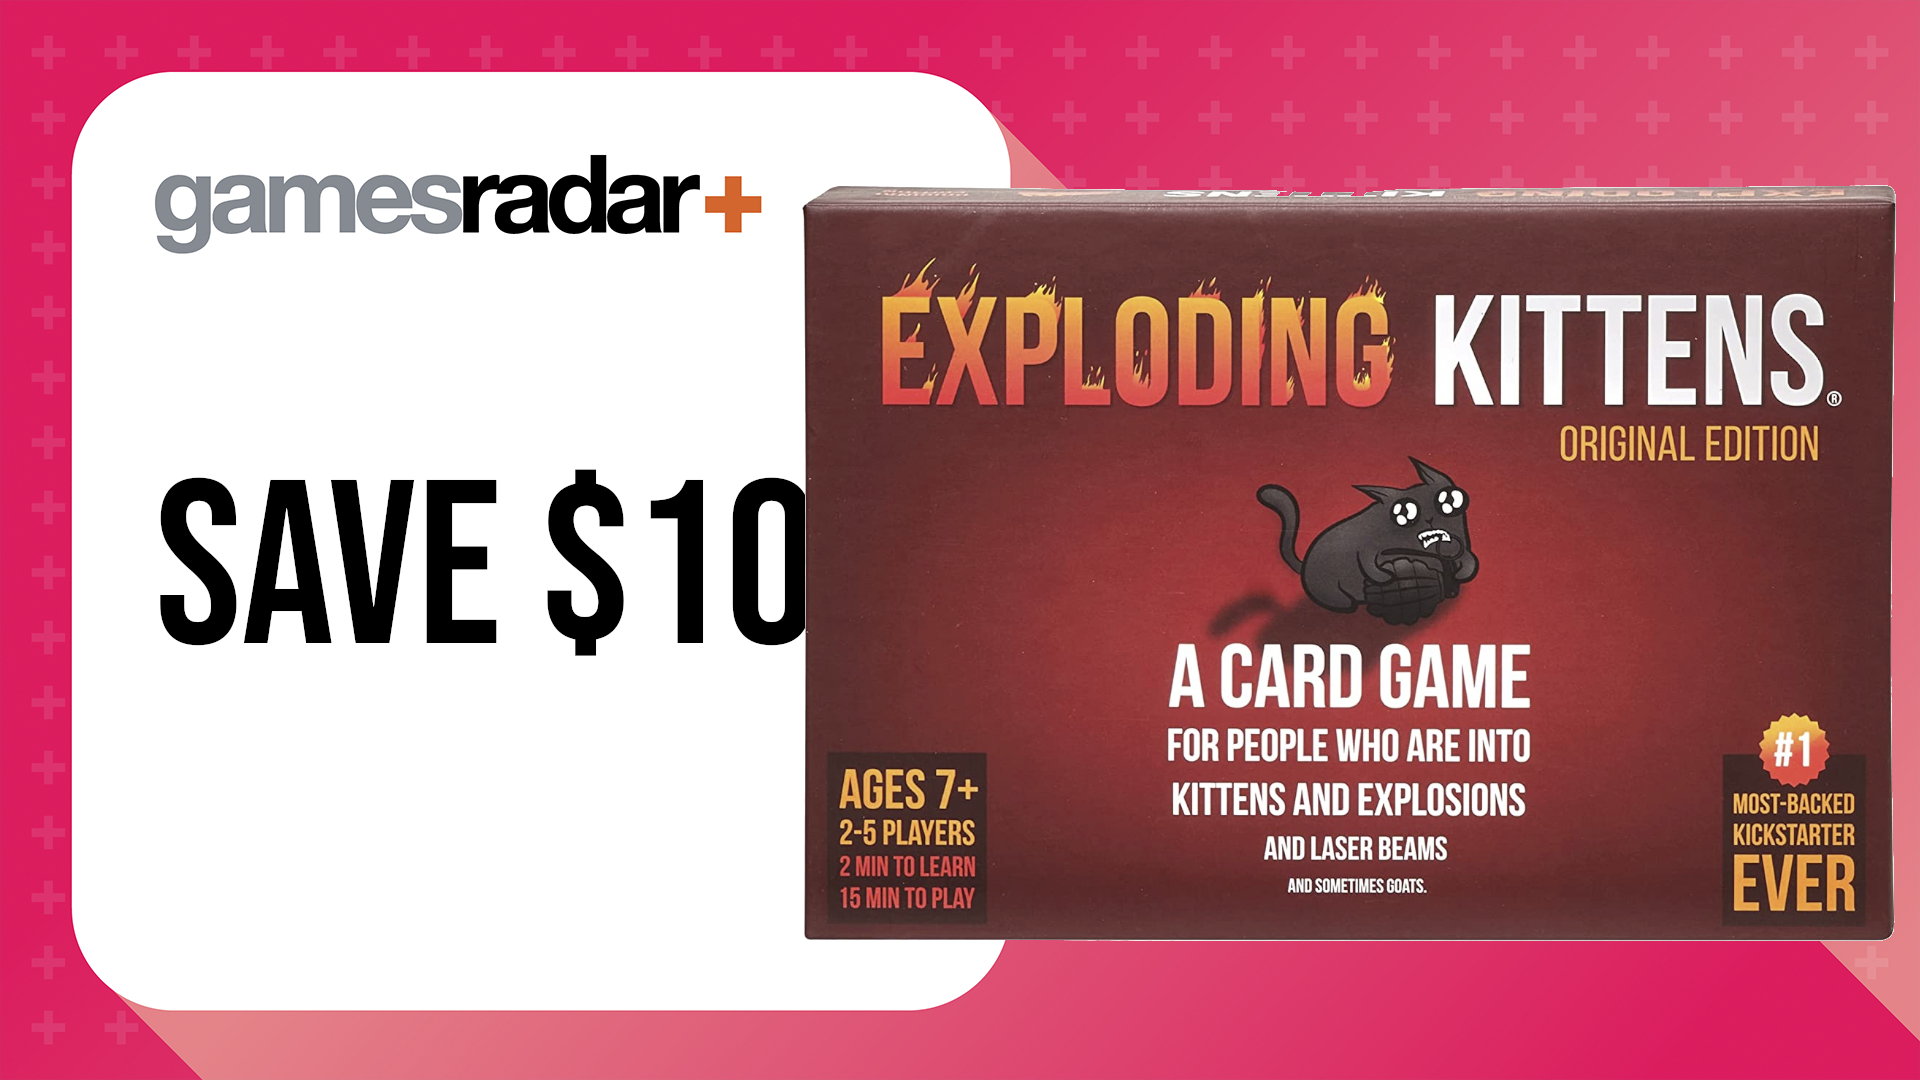 Black Friday board game deals with Exploding Kittens